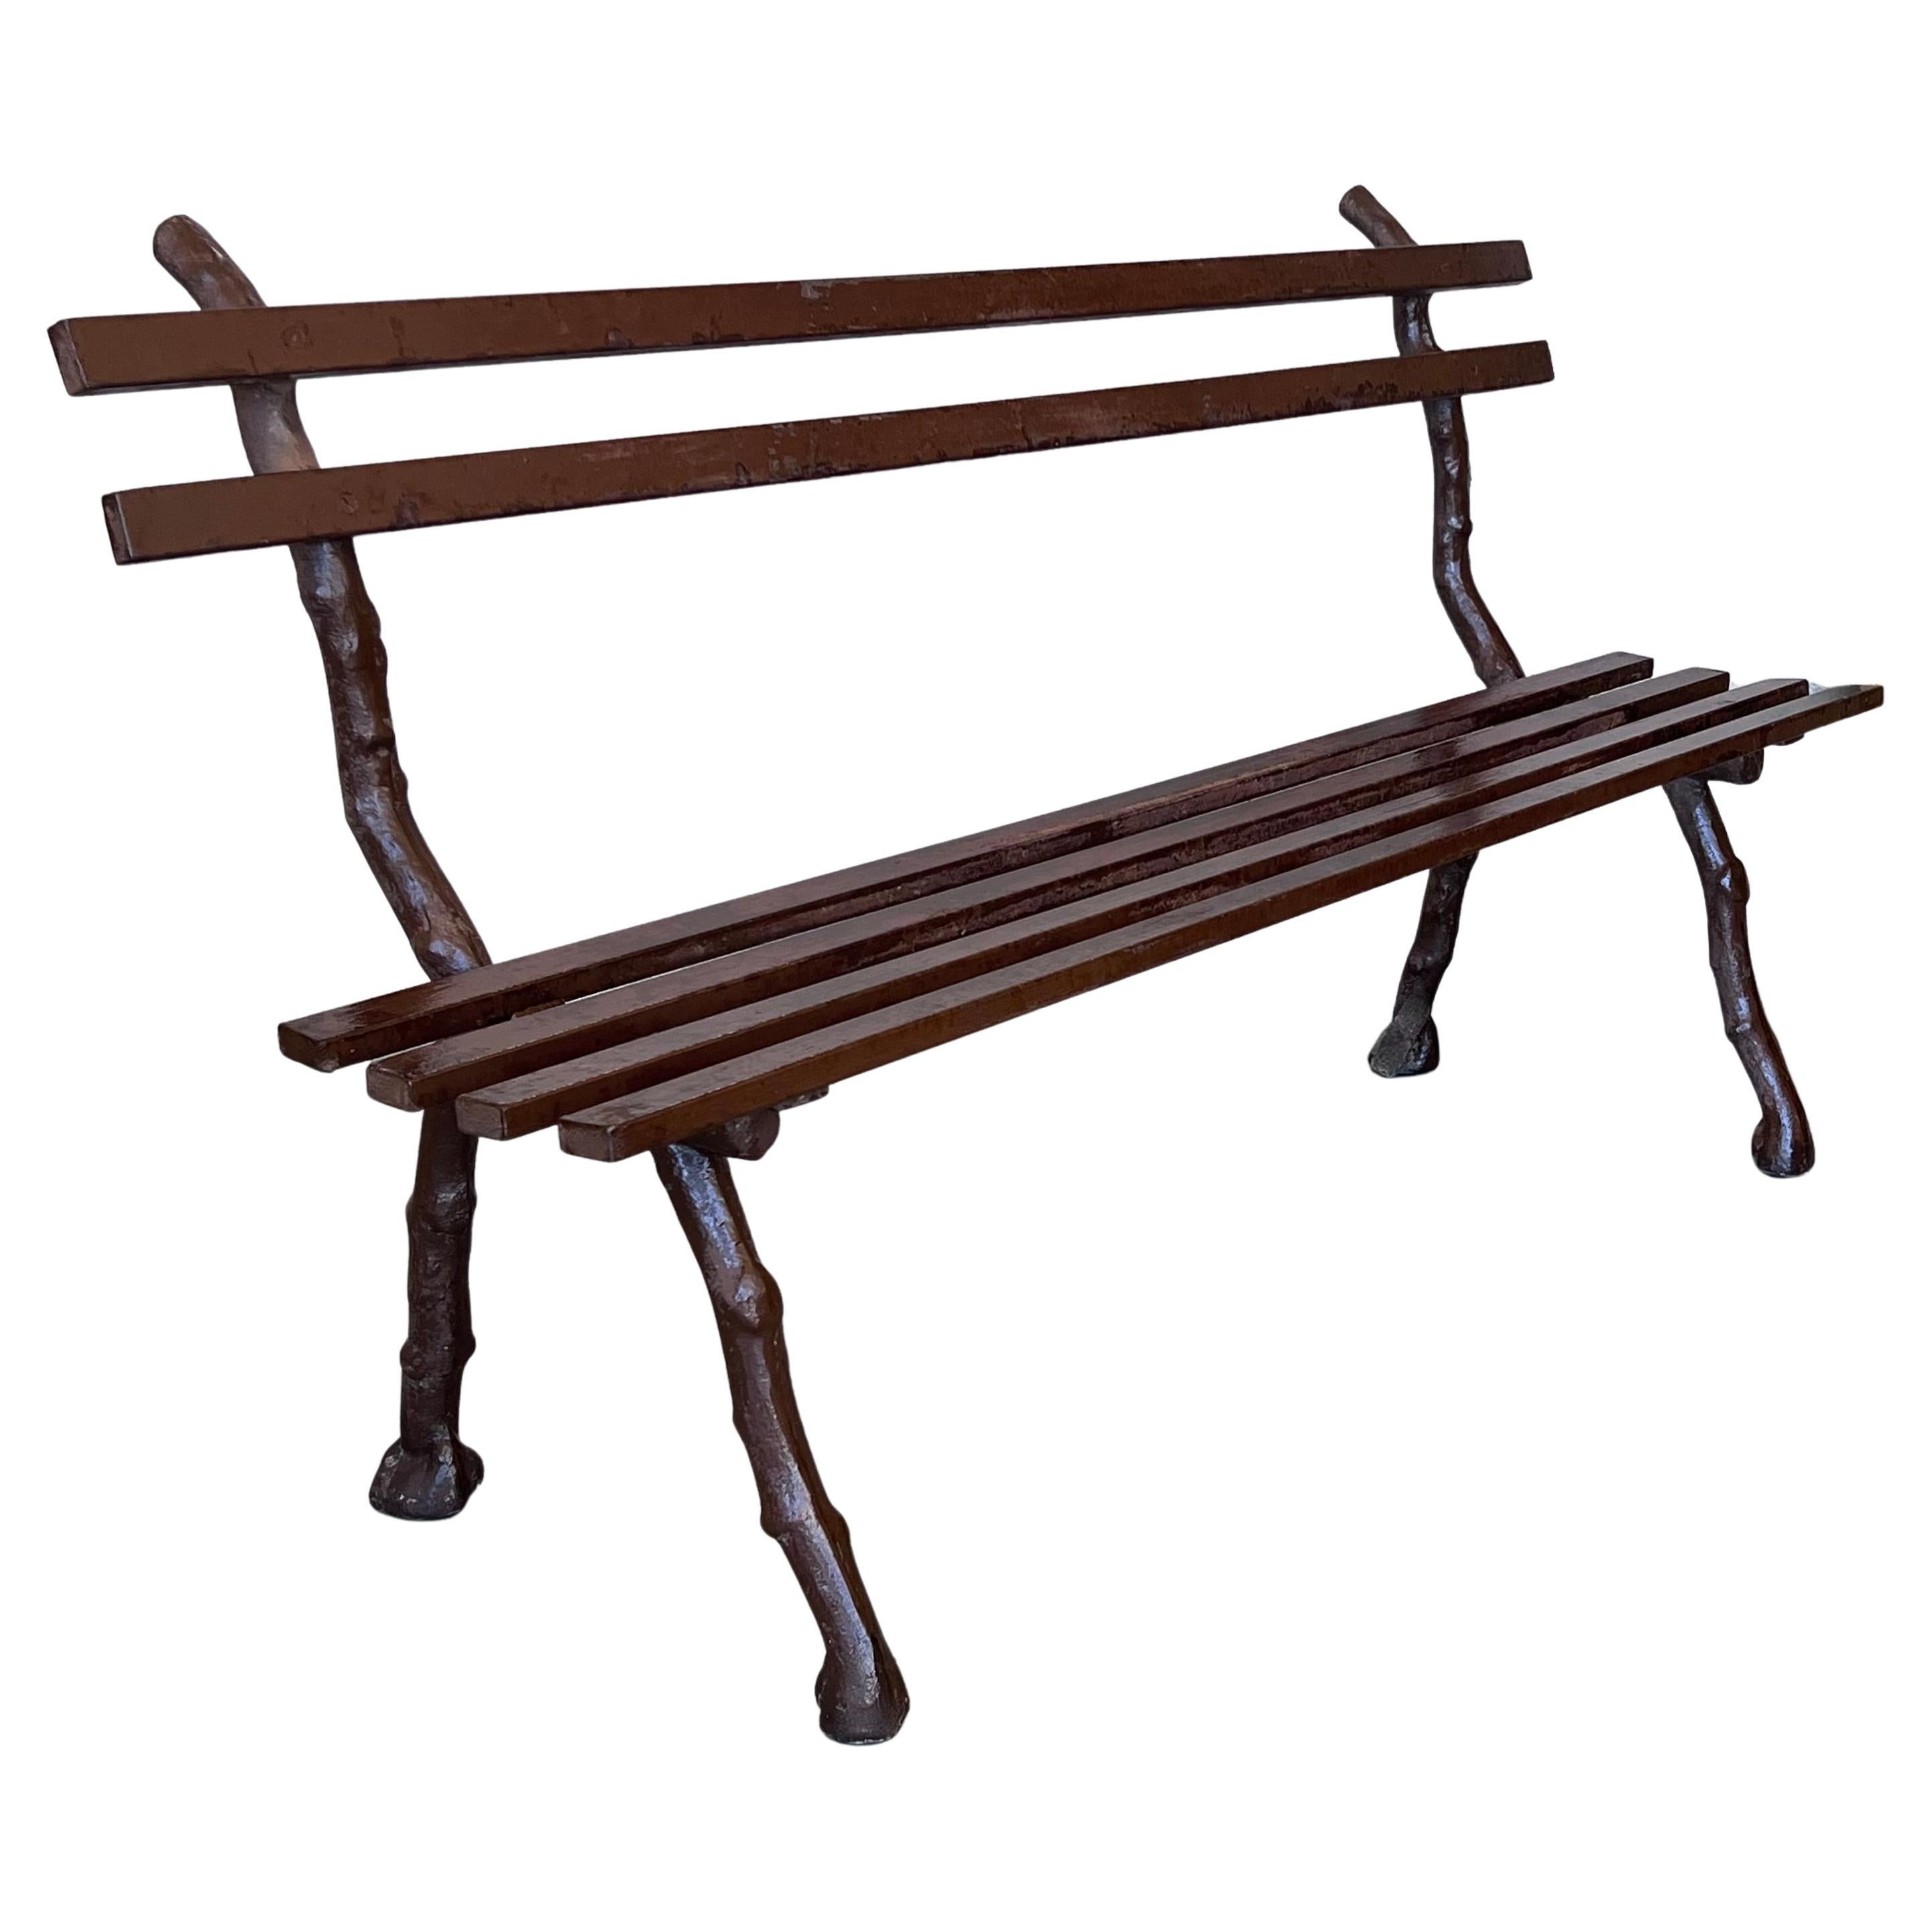 19th Century French Provincial Brown Garden Bench with Cast Iron Legs